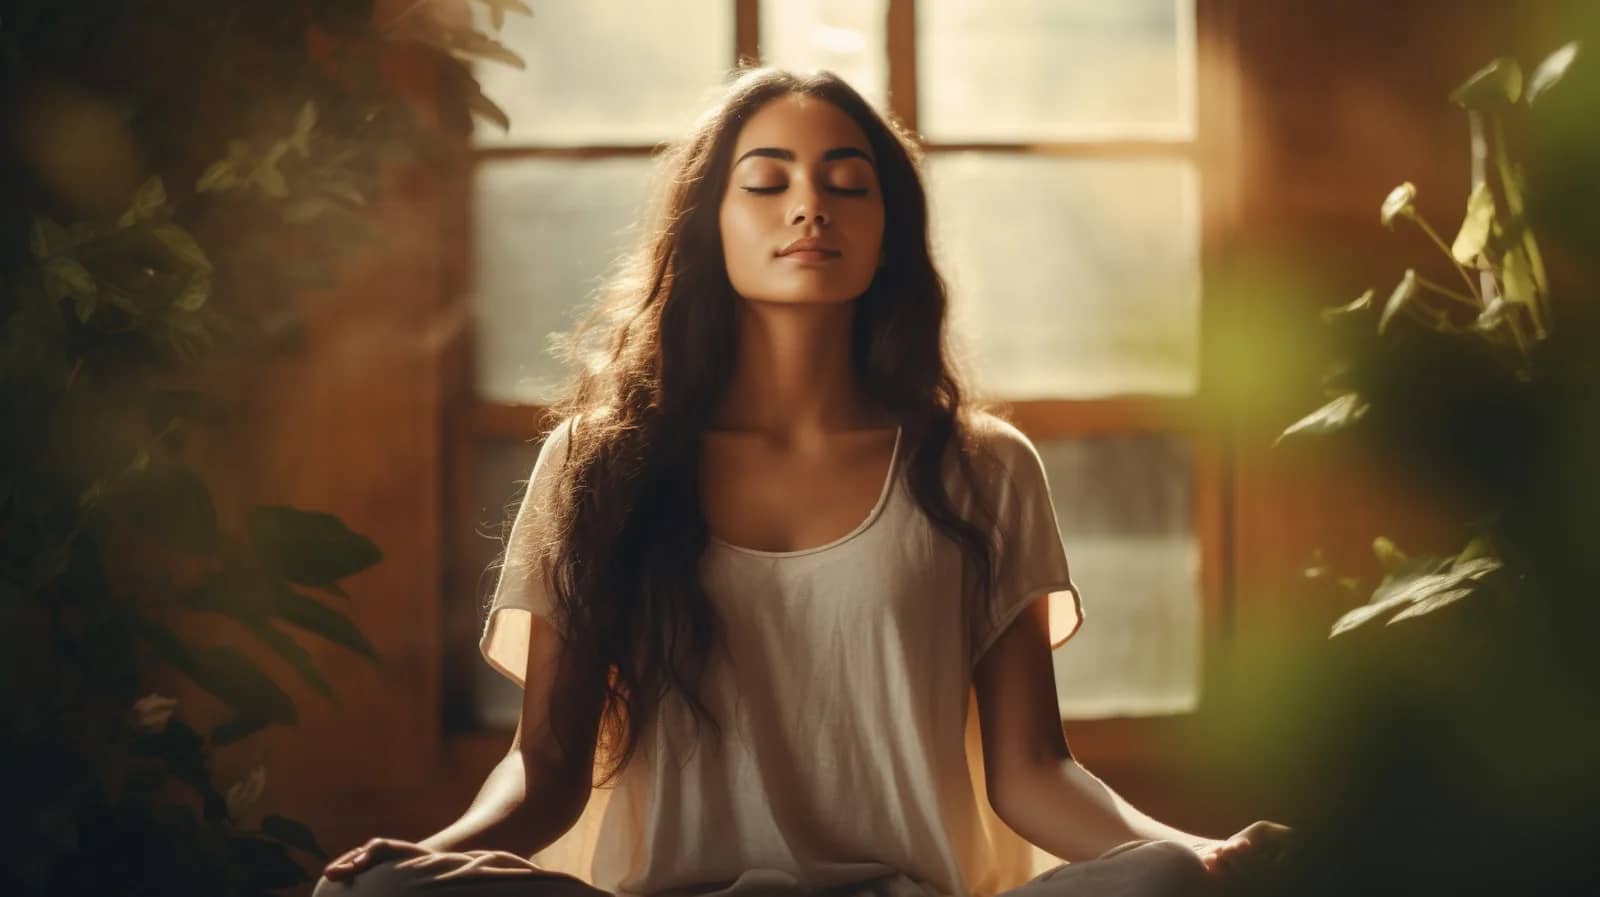 A woman reducing her stress and anxiety through meditation